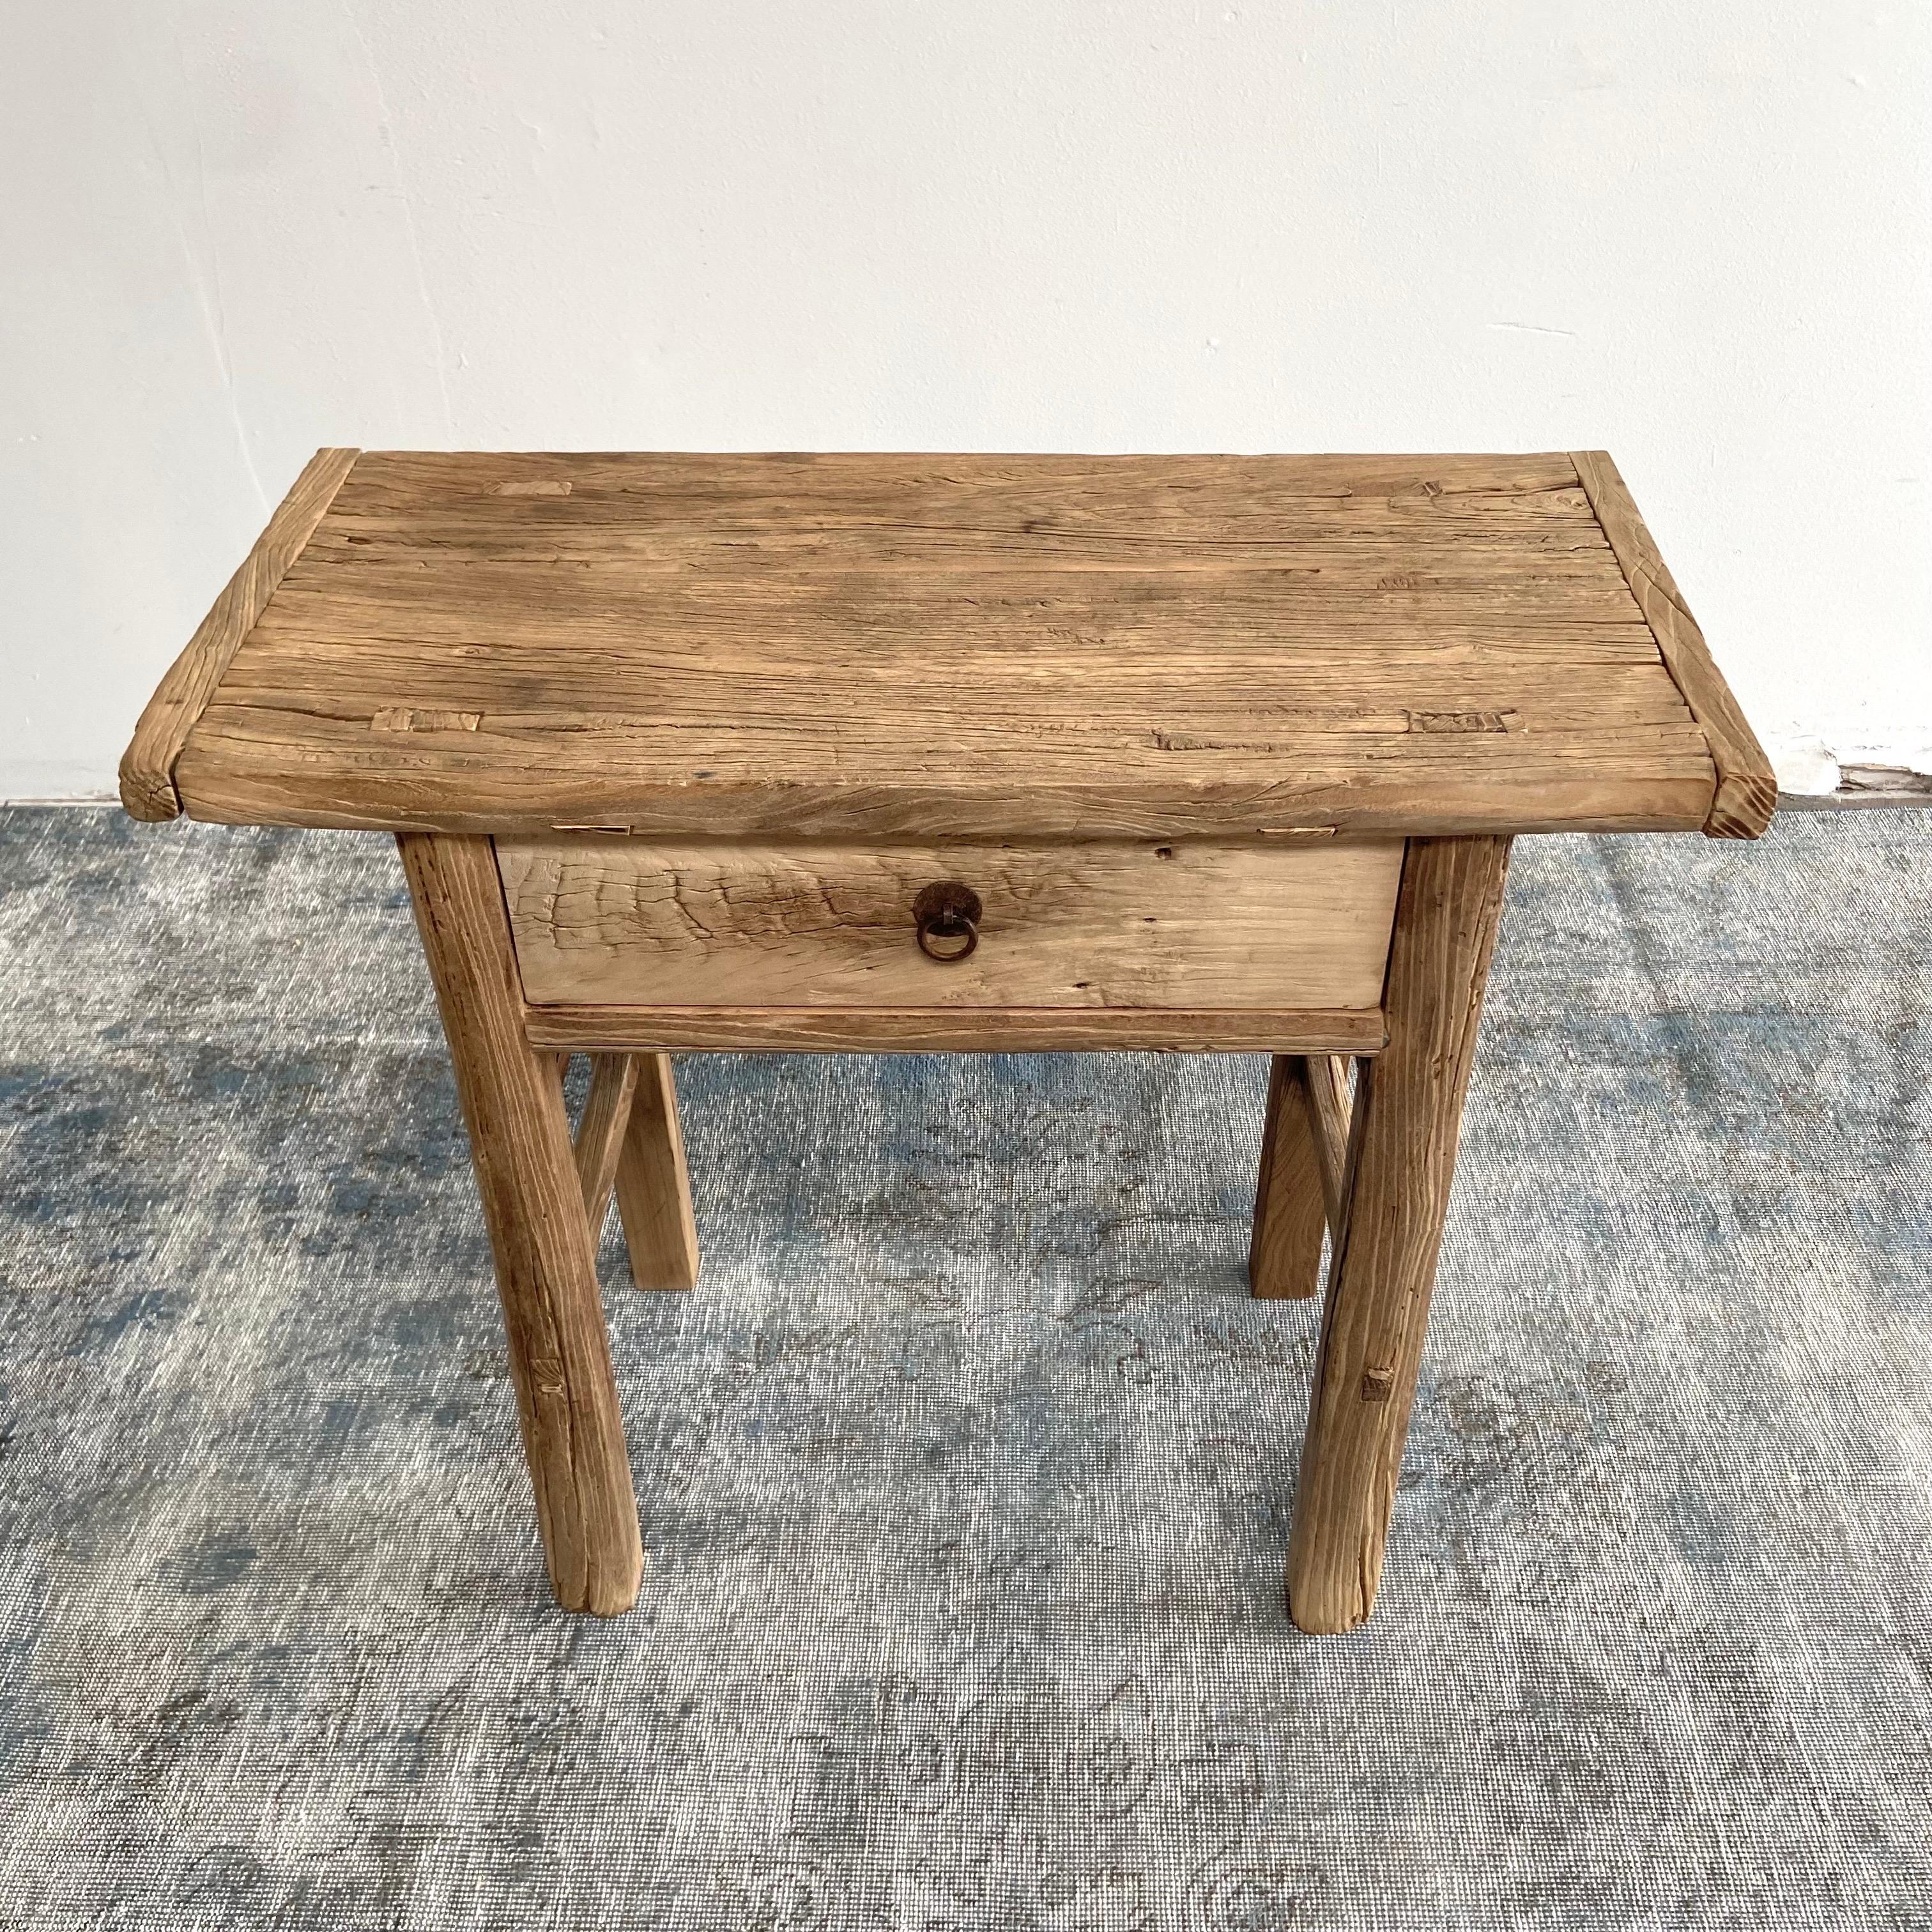 Vintage Antique Elm wood console table. Beautiful antique patina, with weathering and age, these are solid and sturdy ready for daily use, use as a entry table, sofa table or console in a dining room. Great in a living room with baskets or ottomans